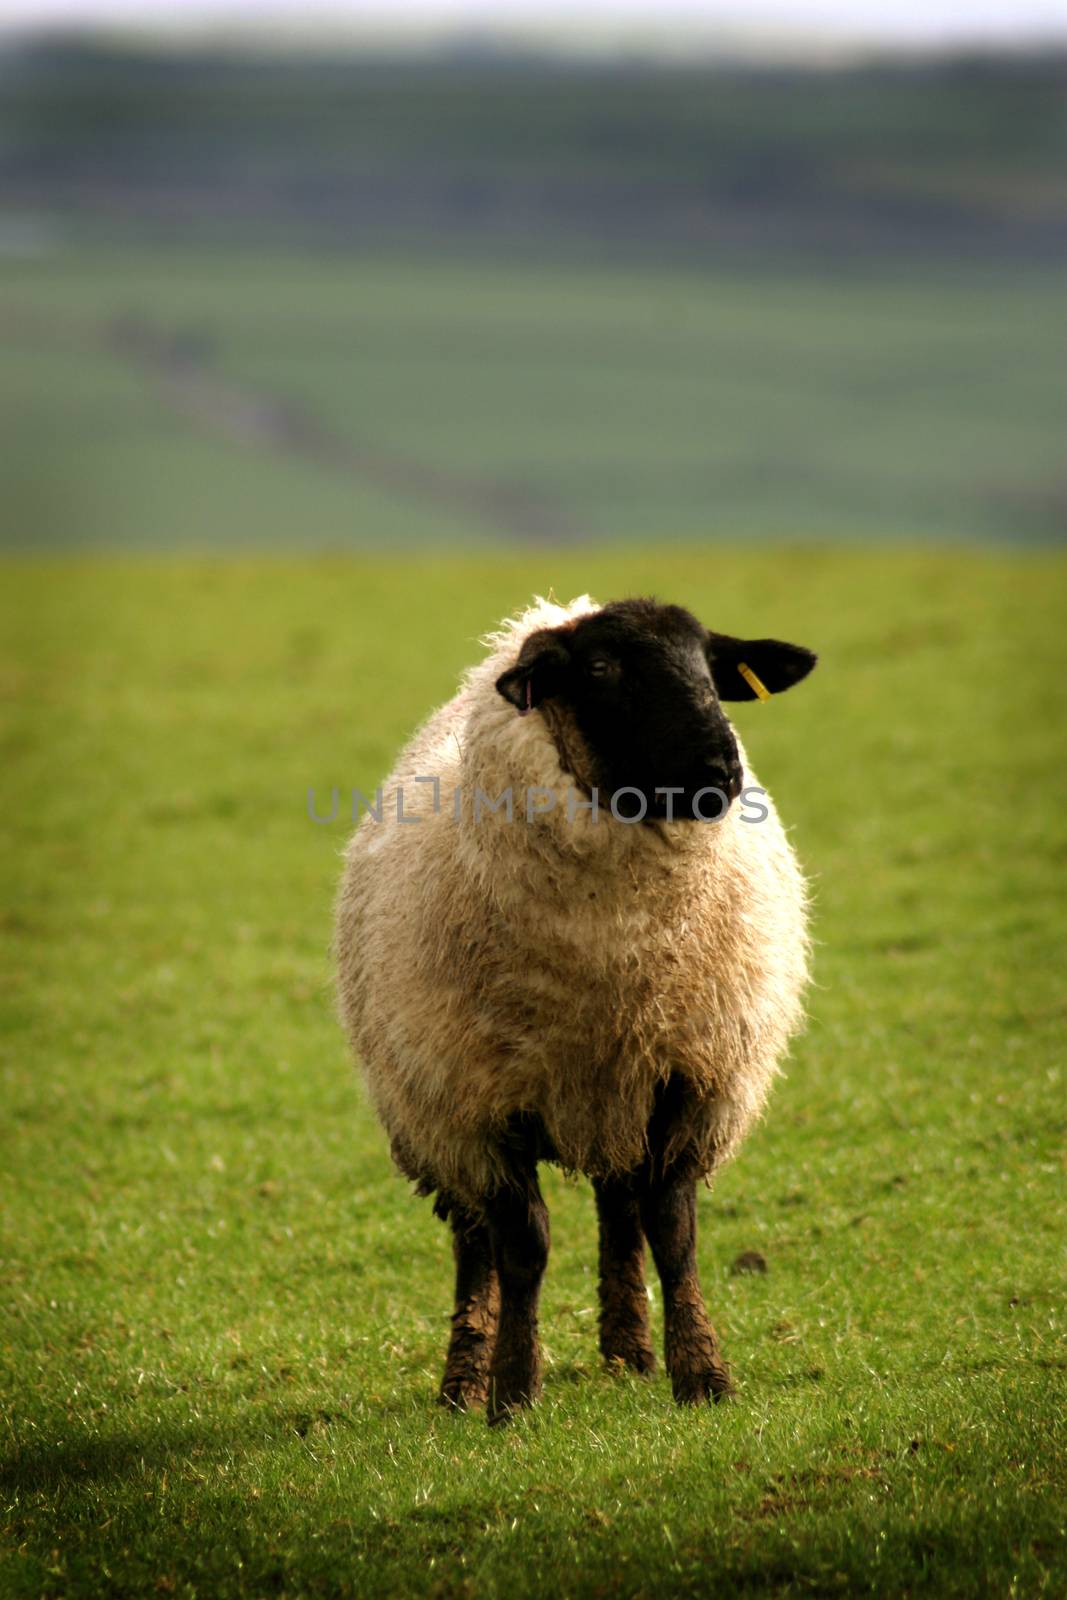 A lonely sheep taking stock of the situation.